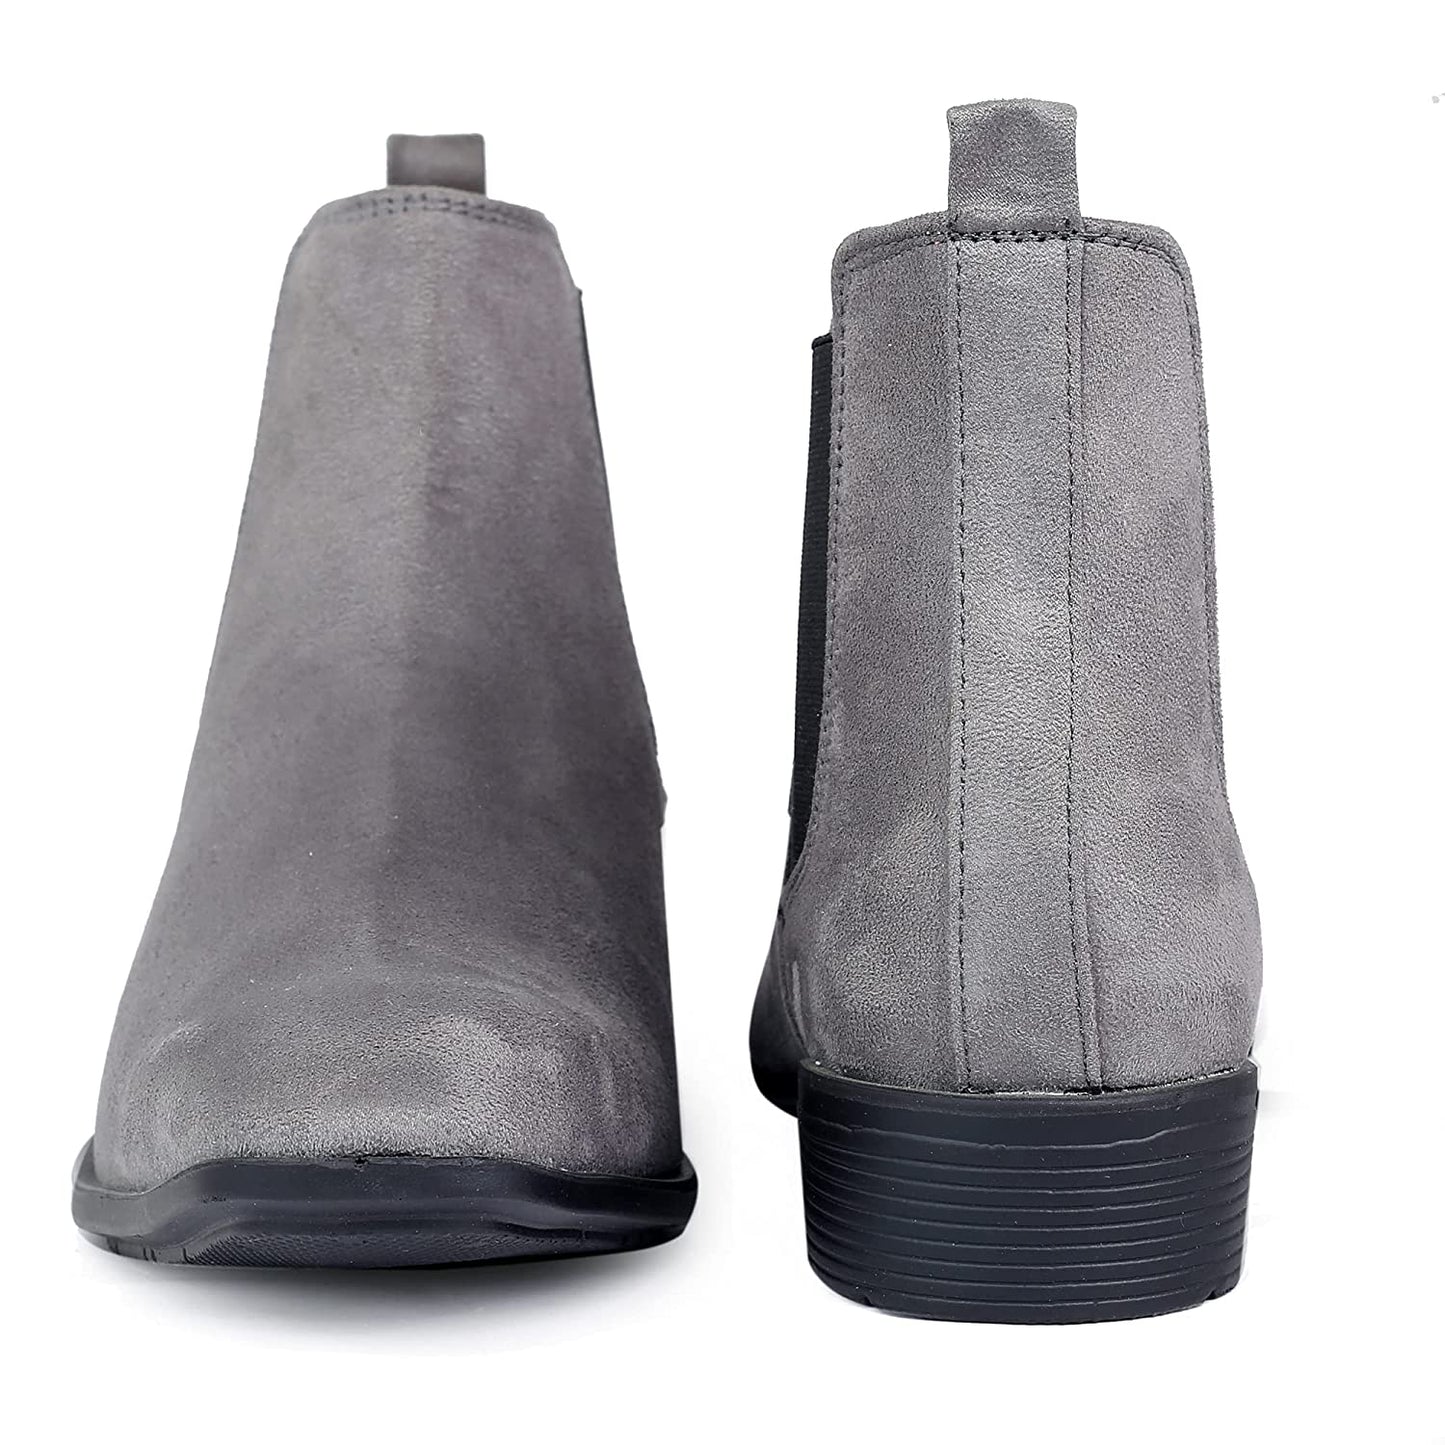 New Arrival Latest Suede Material Grey Casual Chelsea Boots For Men-JonasParamount